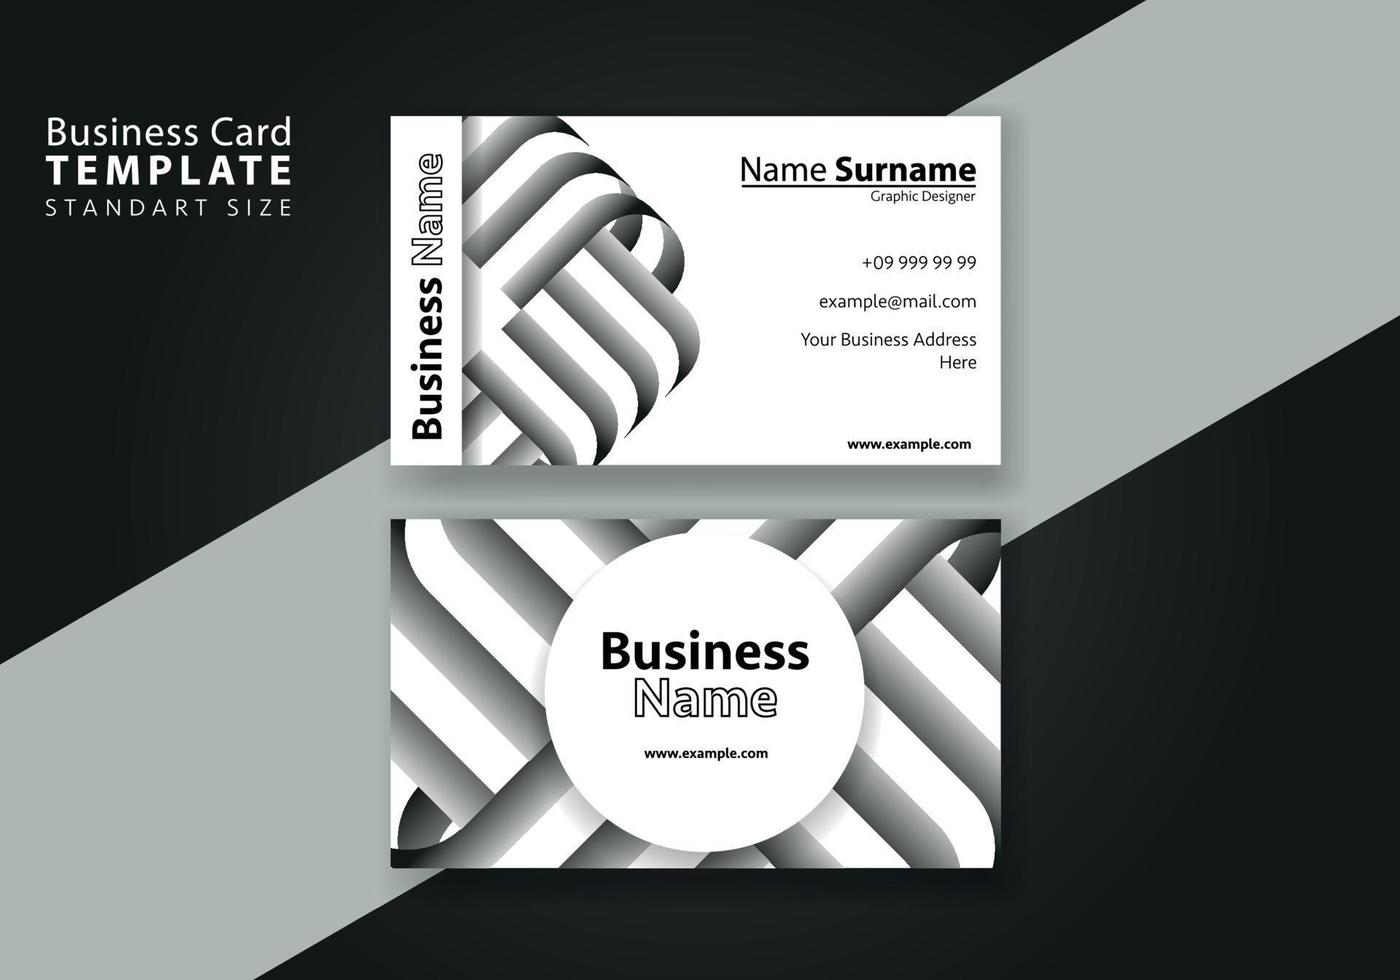 Business Card Template Design Abstract Modern business card for Luxury Presentation of Simple Corporate Identity Concept Minimal Elegant Brand Set of Creative Contact Information vector